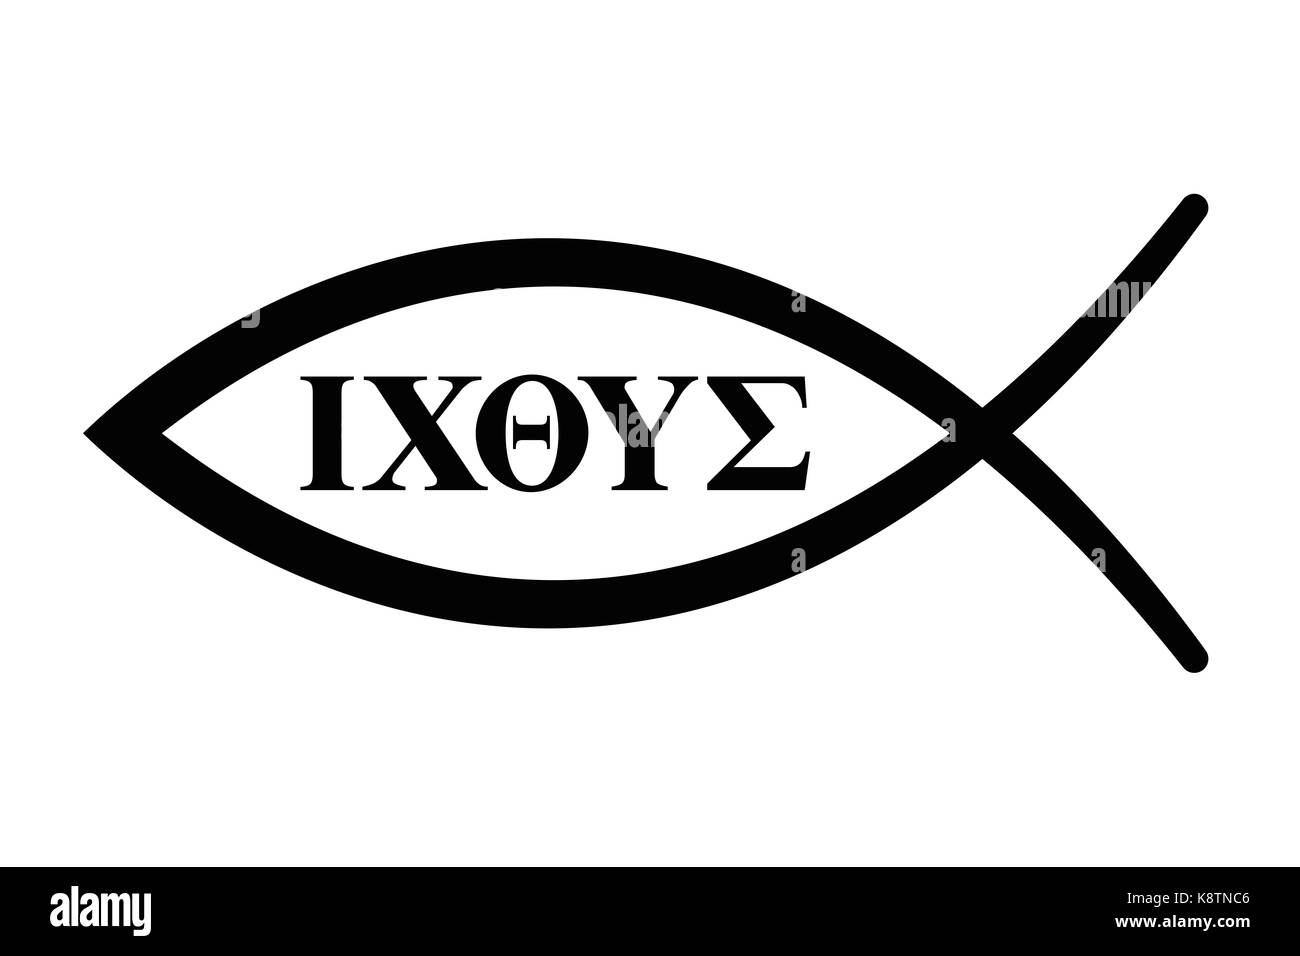 Sign of the fish with initial letters of five Greek words forming the word Ichthus for fish. Jesus Christ, Son of God, Saviour. Black illustration. Stock Photo